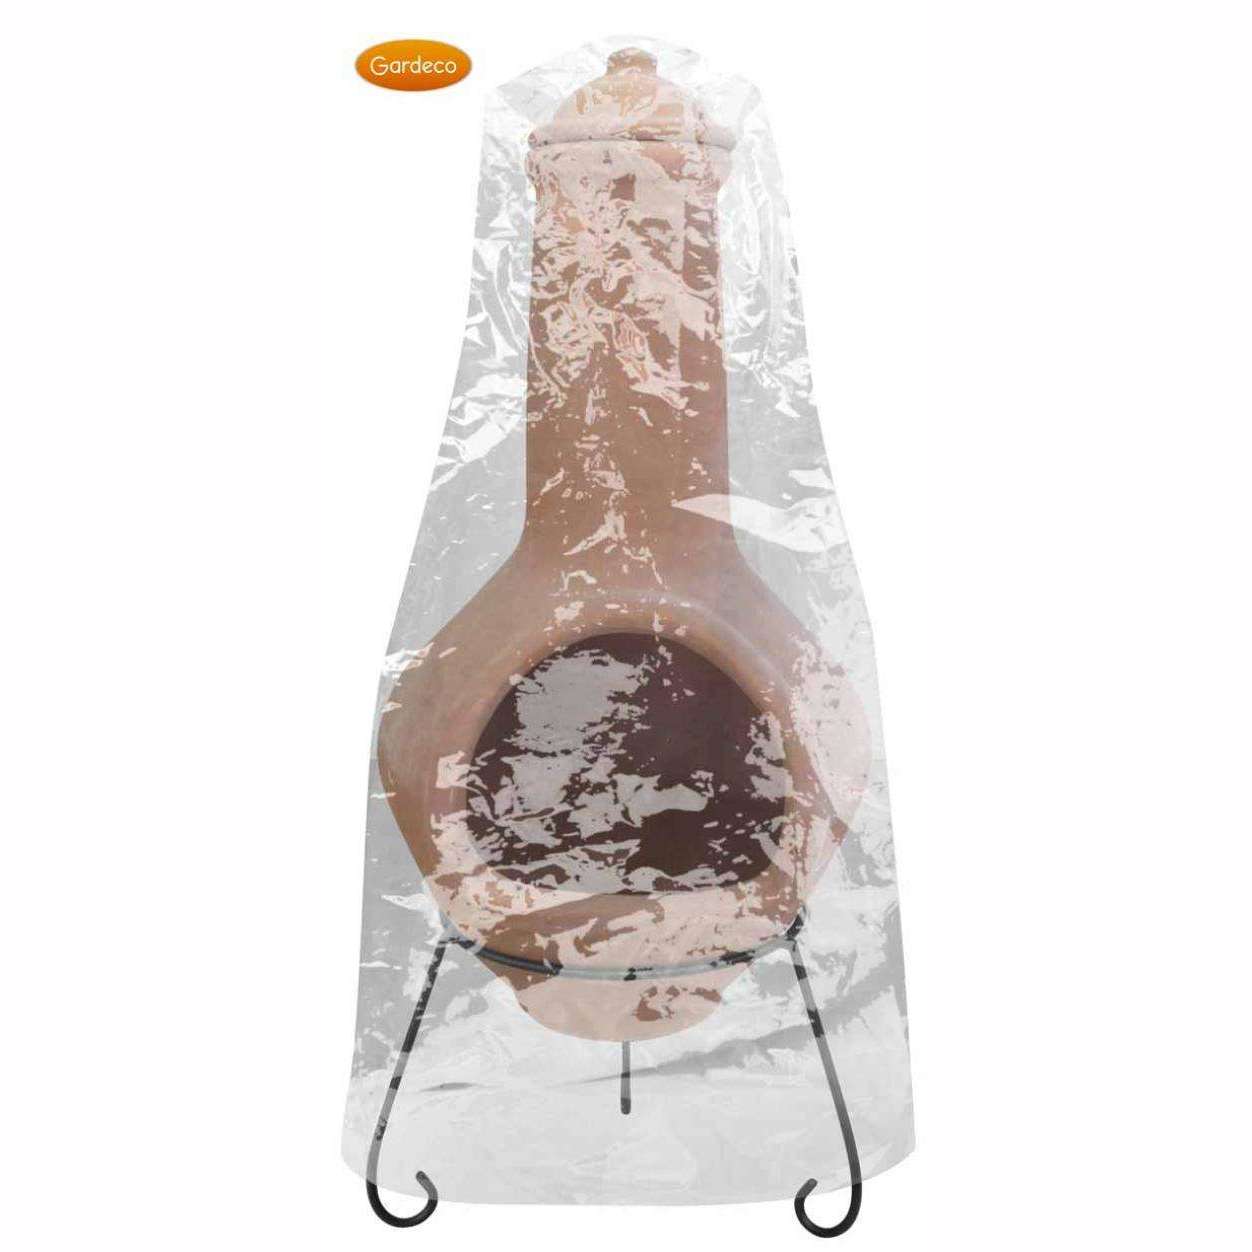 Exceptional Garden:PVC Chimenea cover -Extra Large